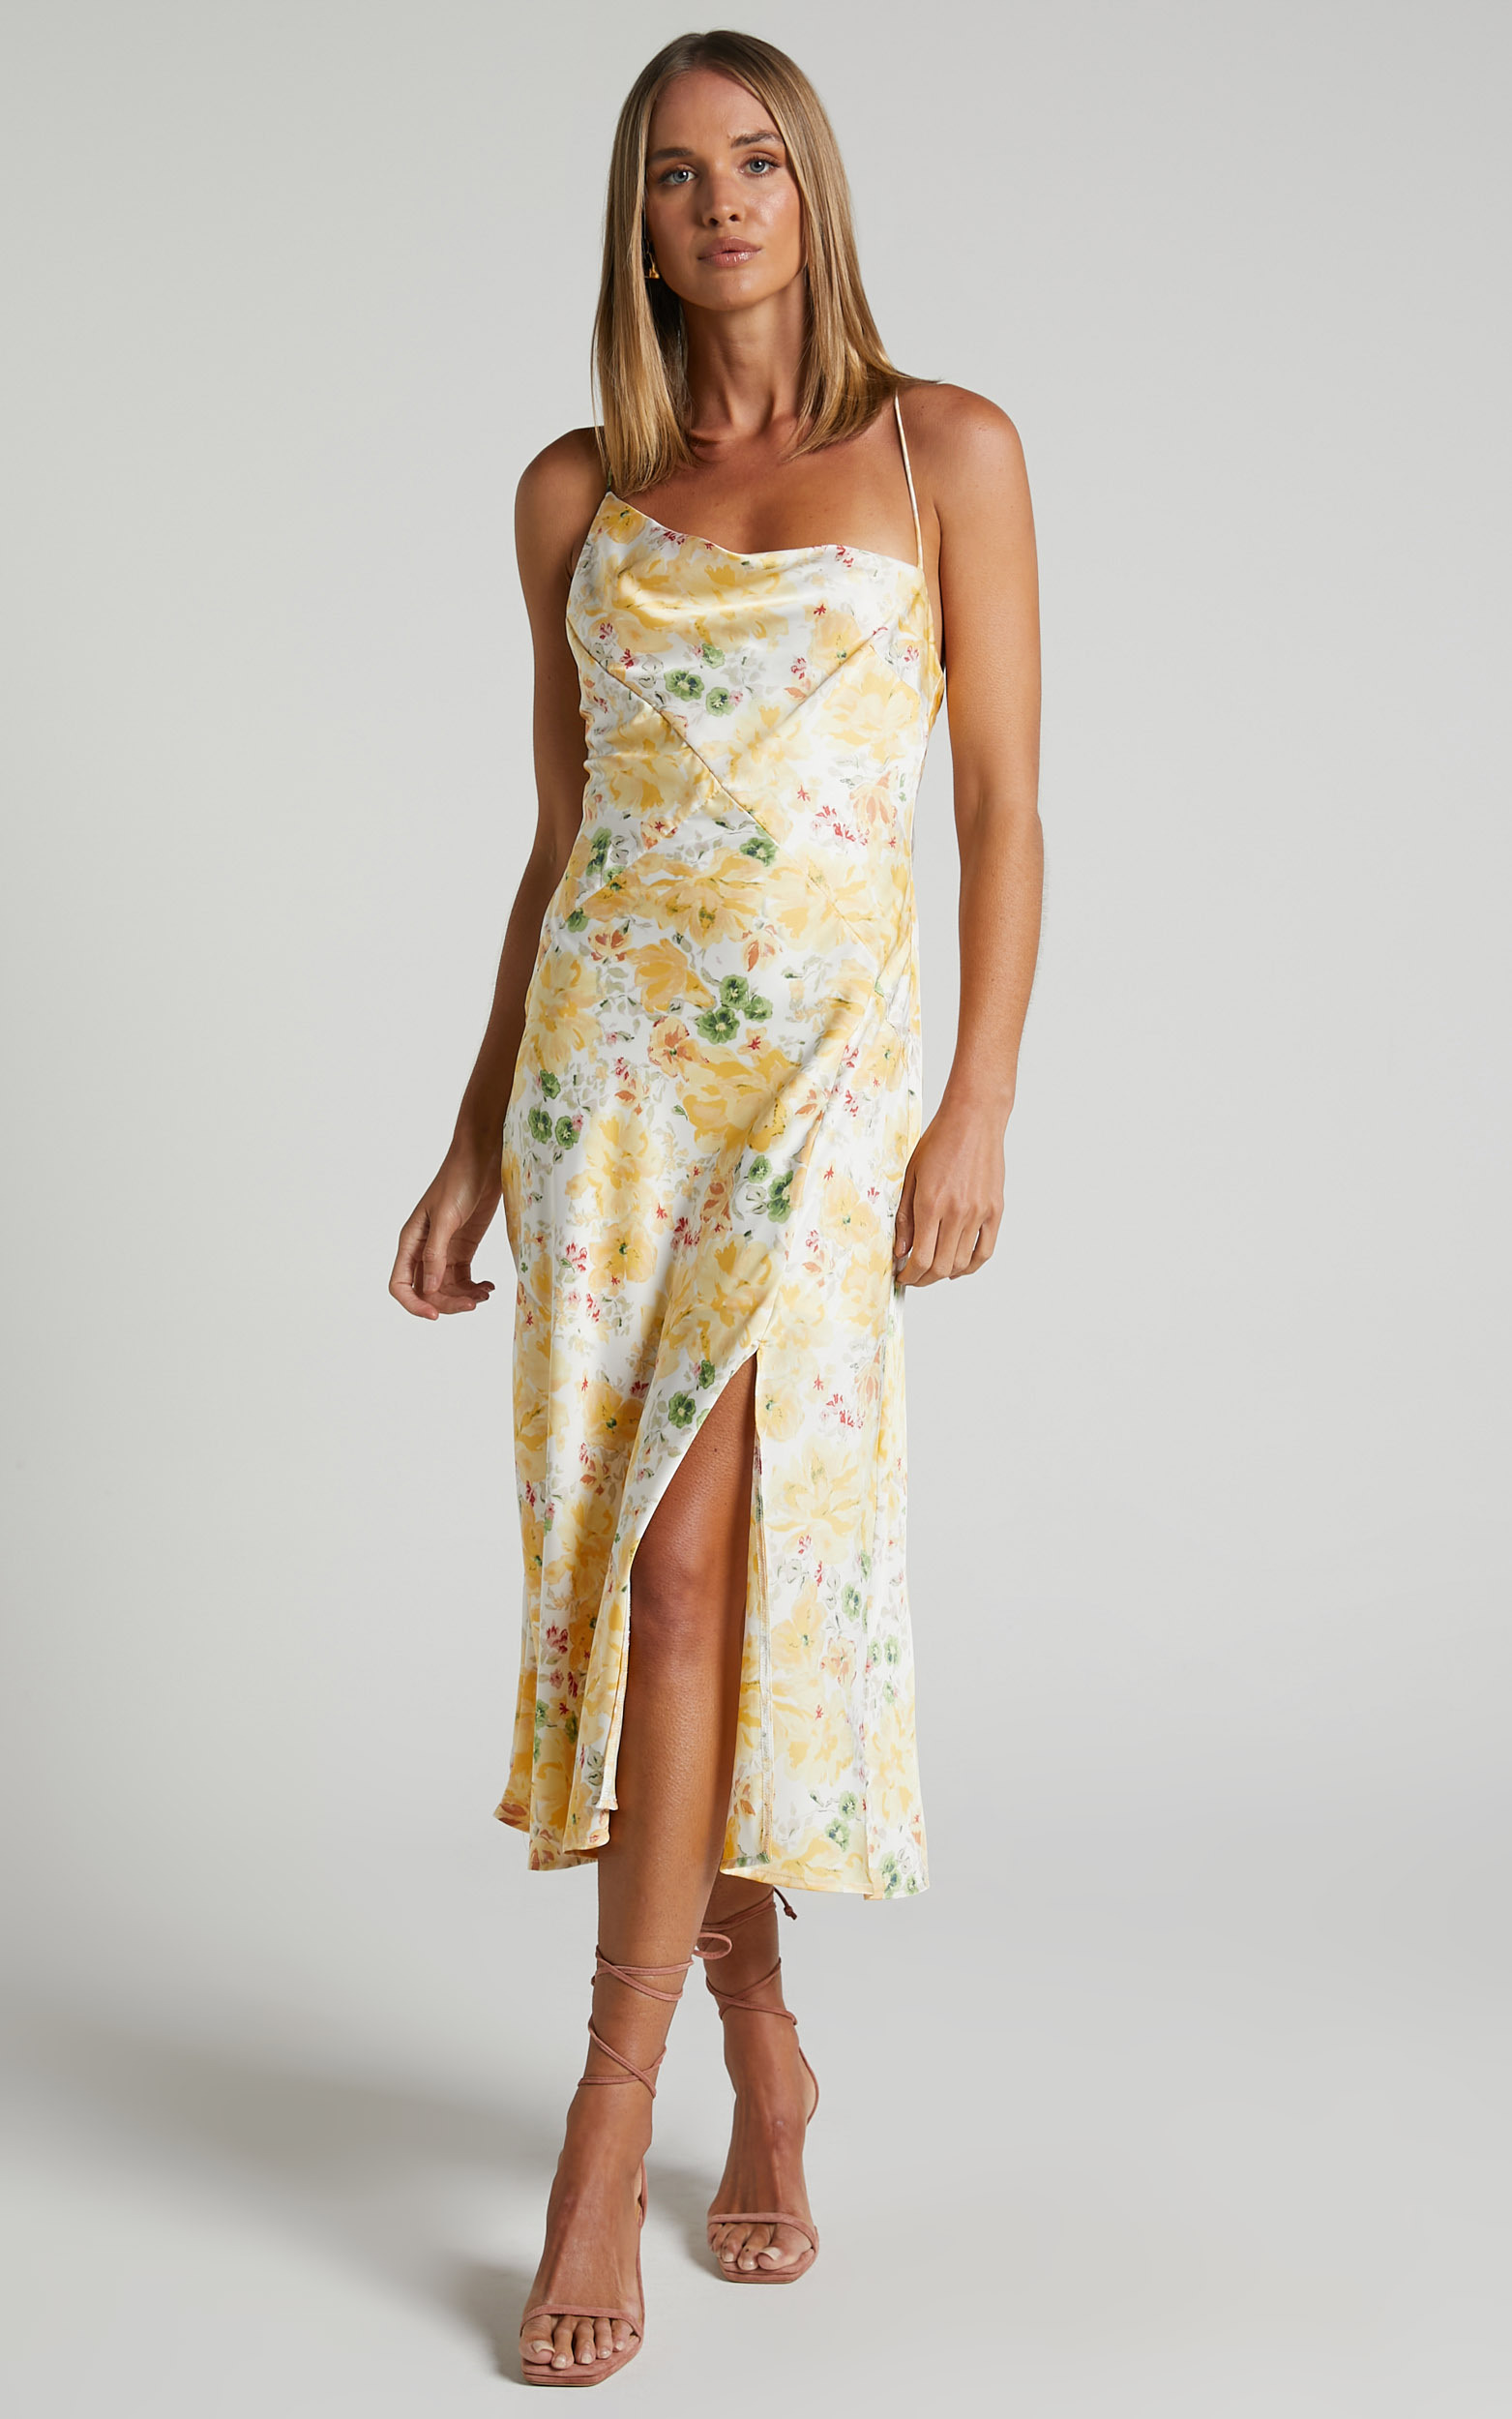 Rischa Midi Dress - Asymmetrical Cowl Neck Side Split Satin Dress in Yellow Floral - 06, YEL1, hi-res image number null